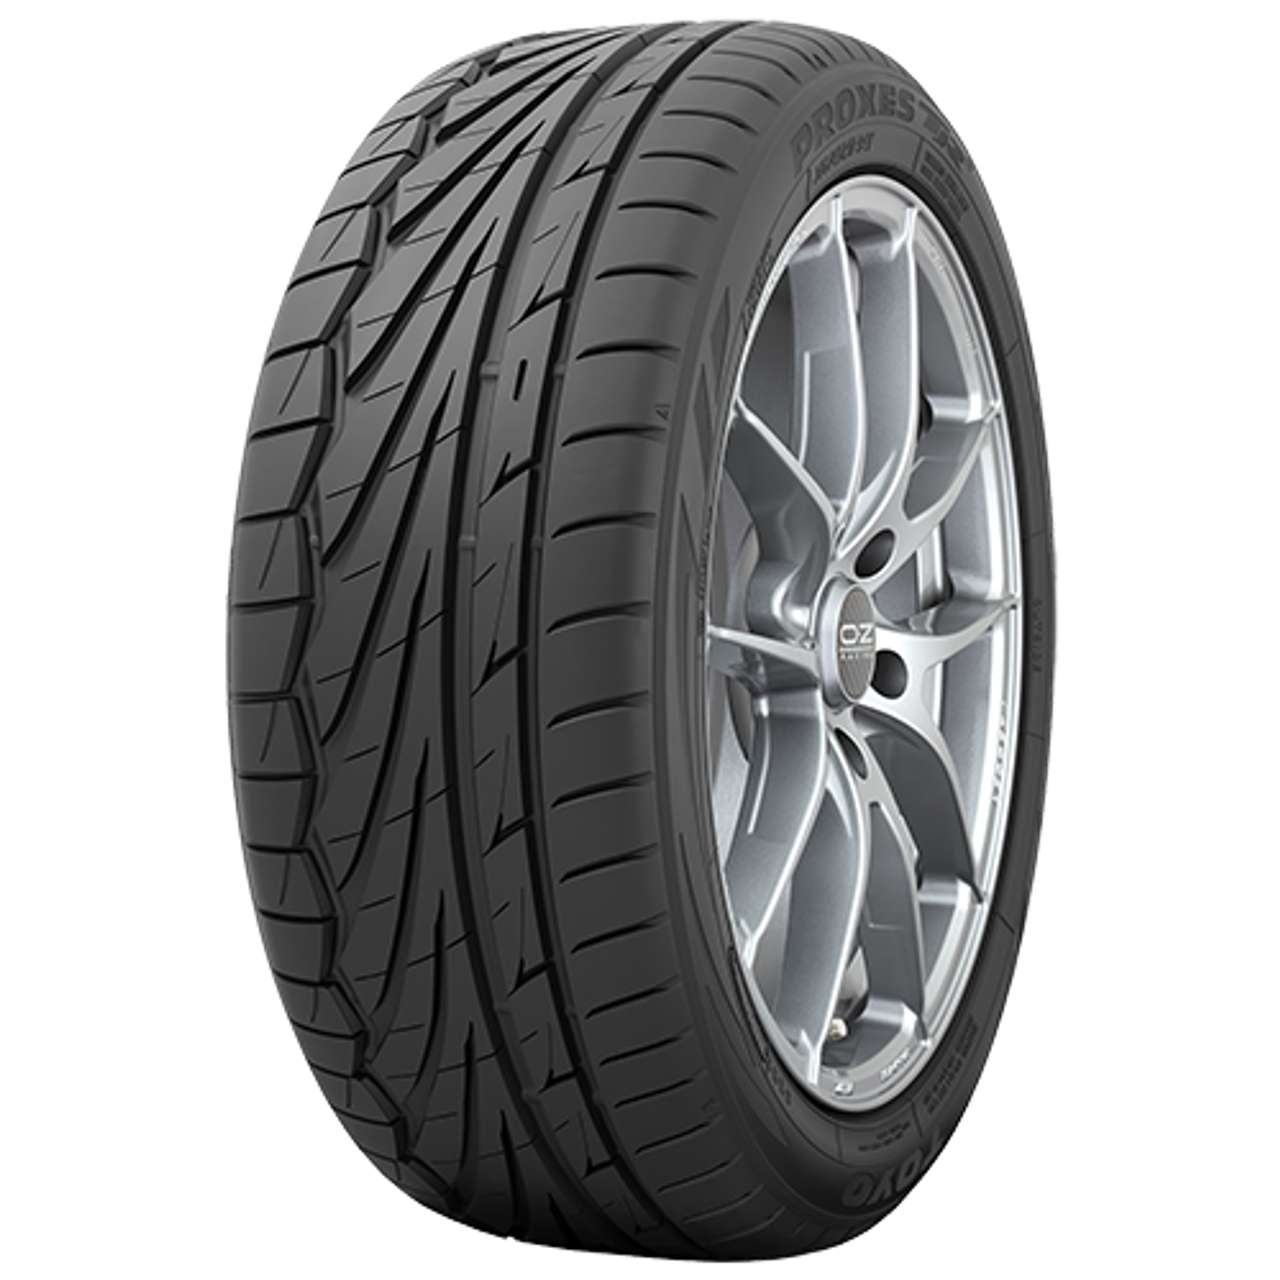 TOYO PROXES TR1 215/55R17 94V BSW